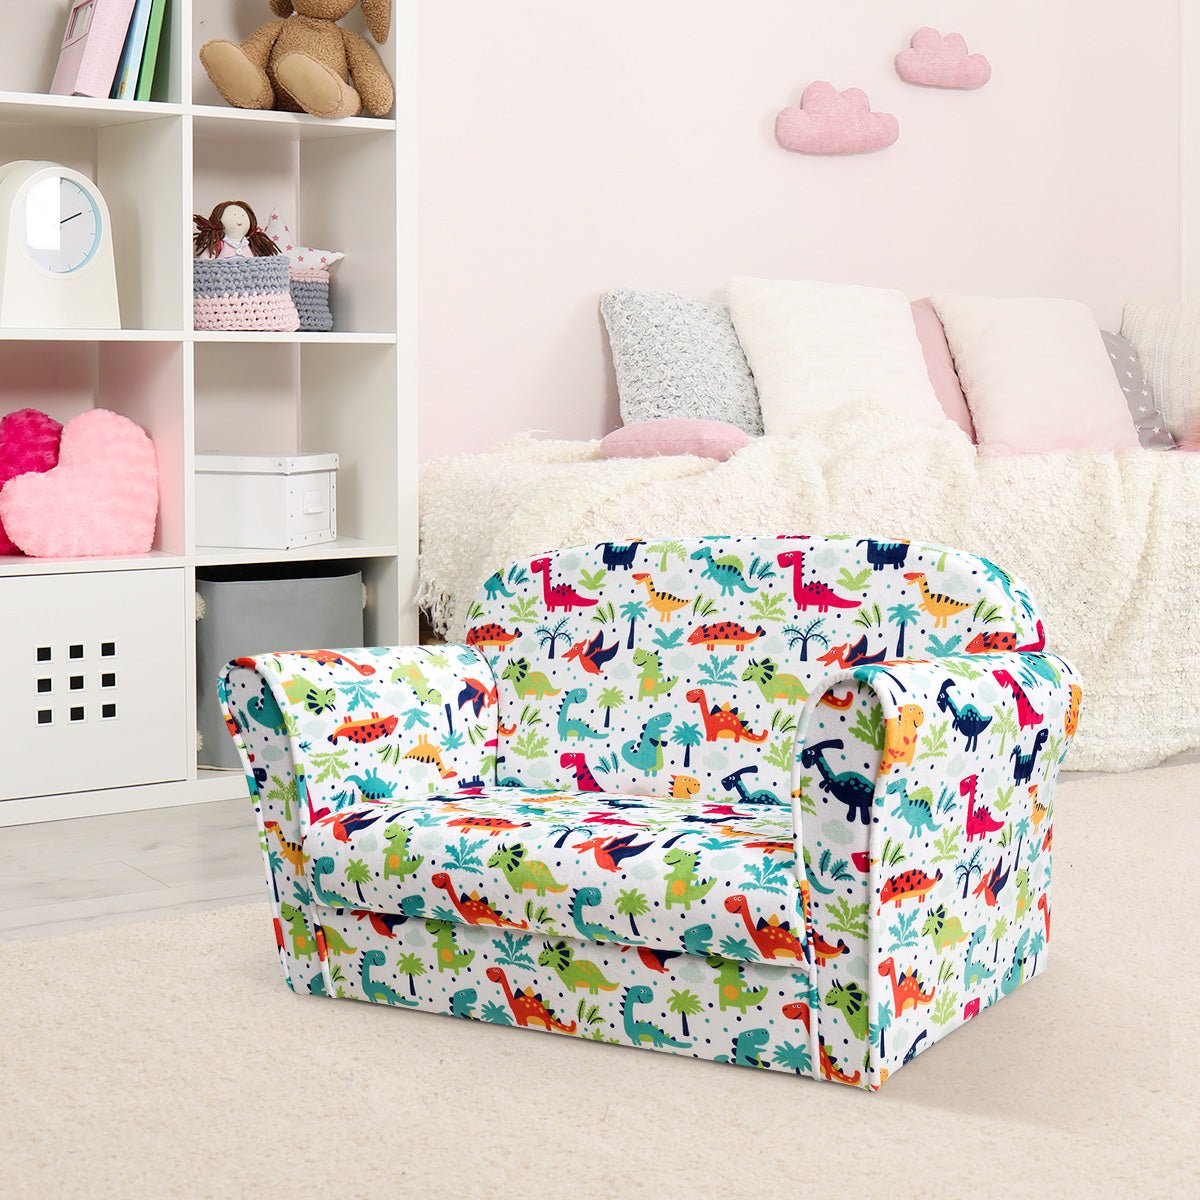 Luxurious Velvet Kids Sofa with Lovely Pattern: Cozy Addition to Baby Room